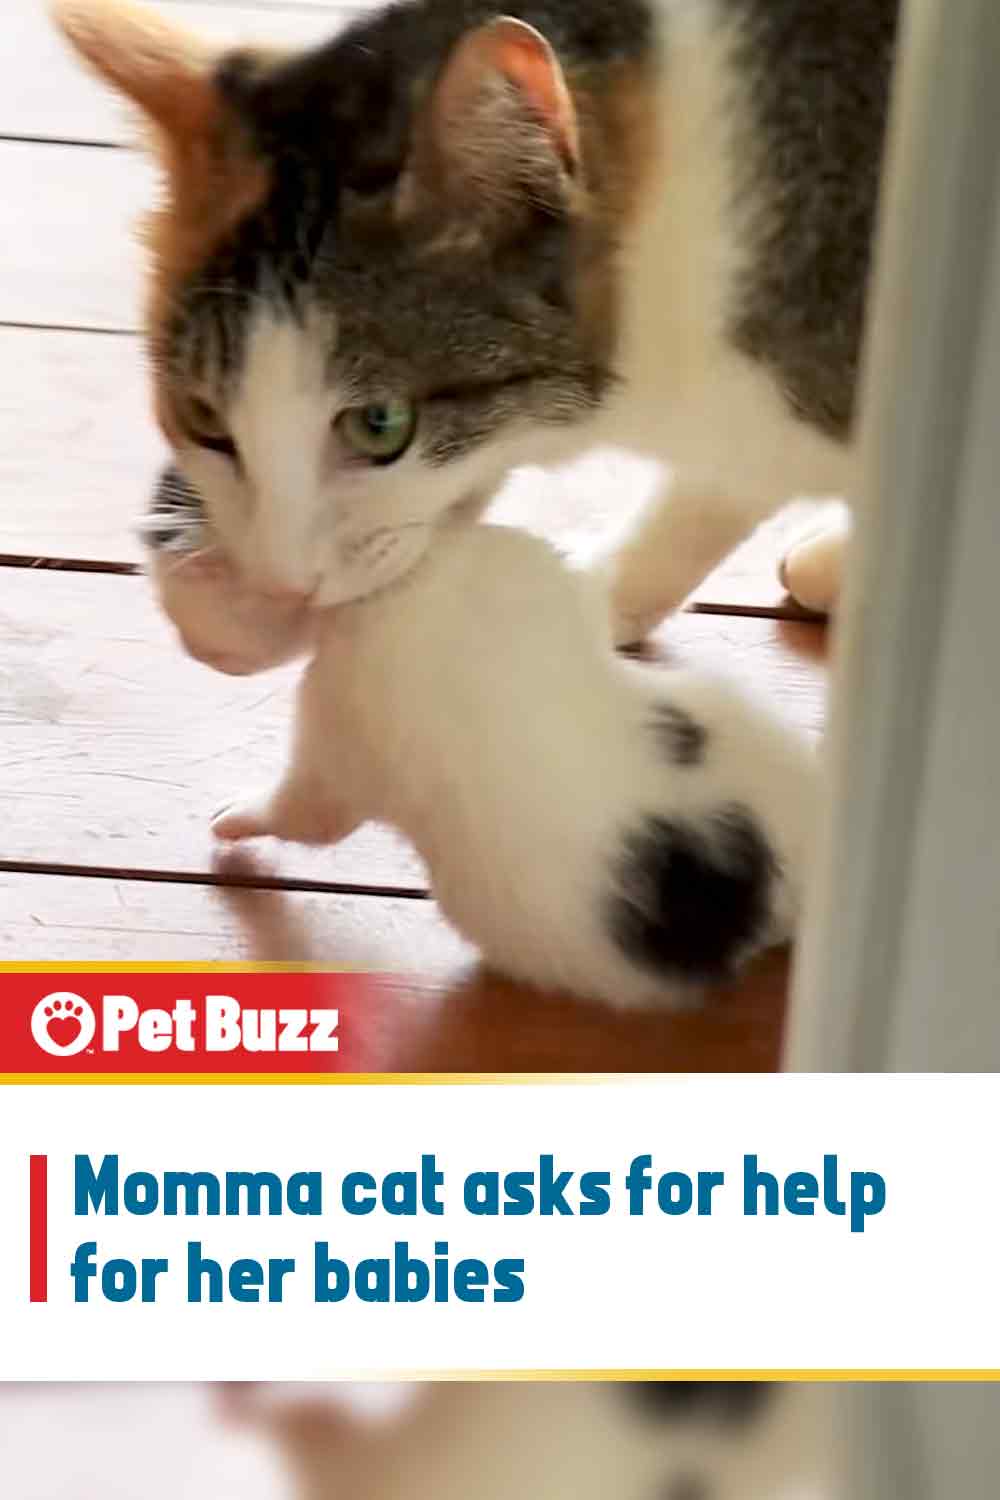 Momma cat asks for help for her babies